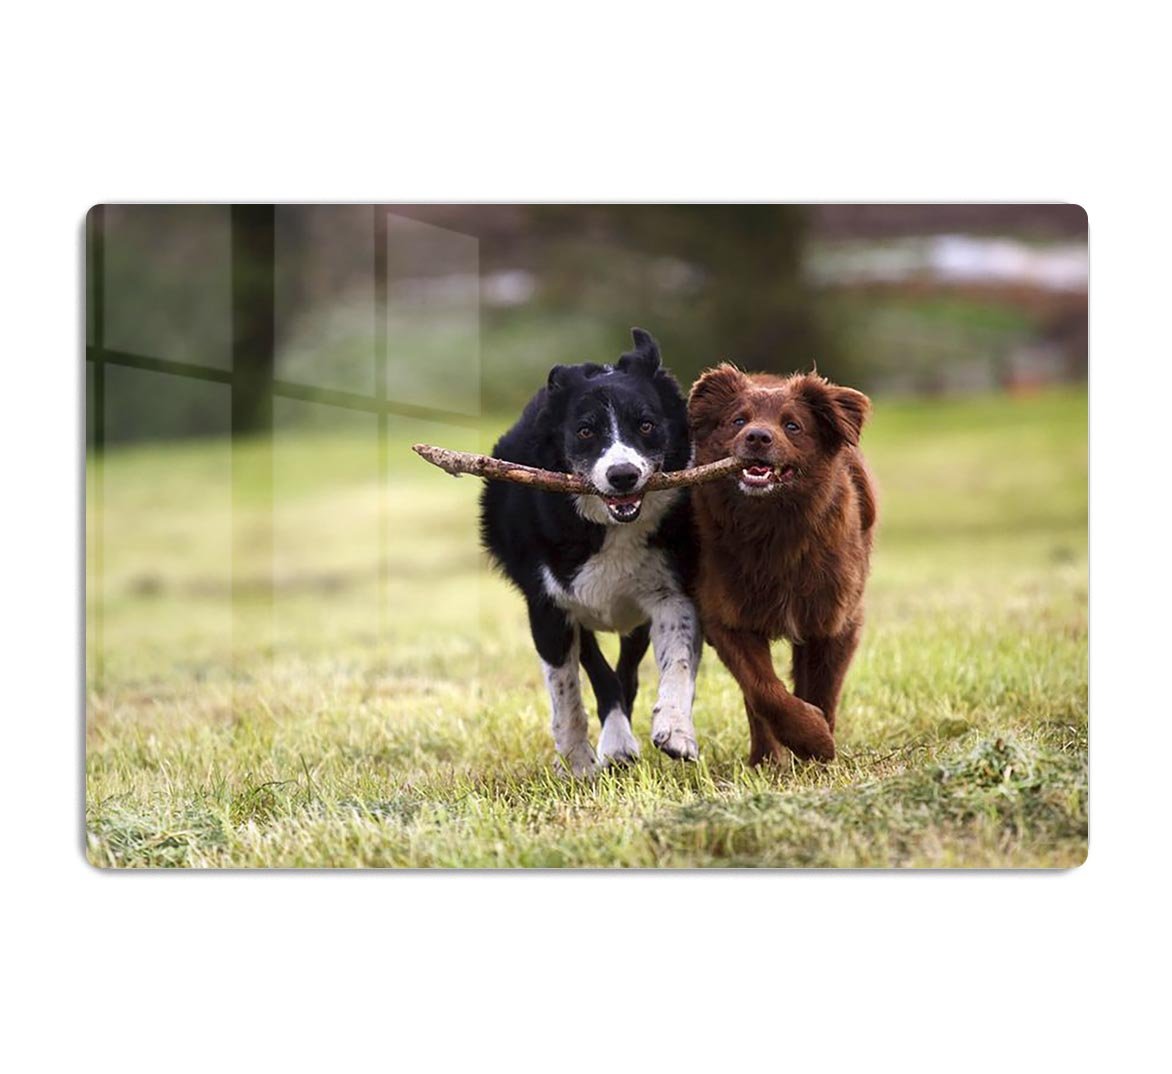 2 border collie dogs fetching a stick in open field HD Metal Print - Canvas Art Rocks - 1